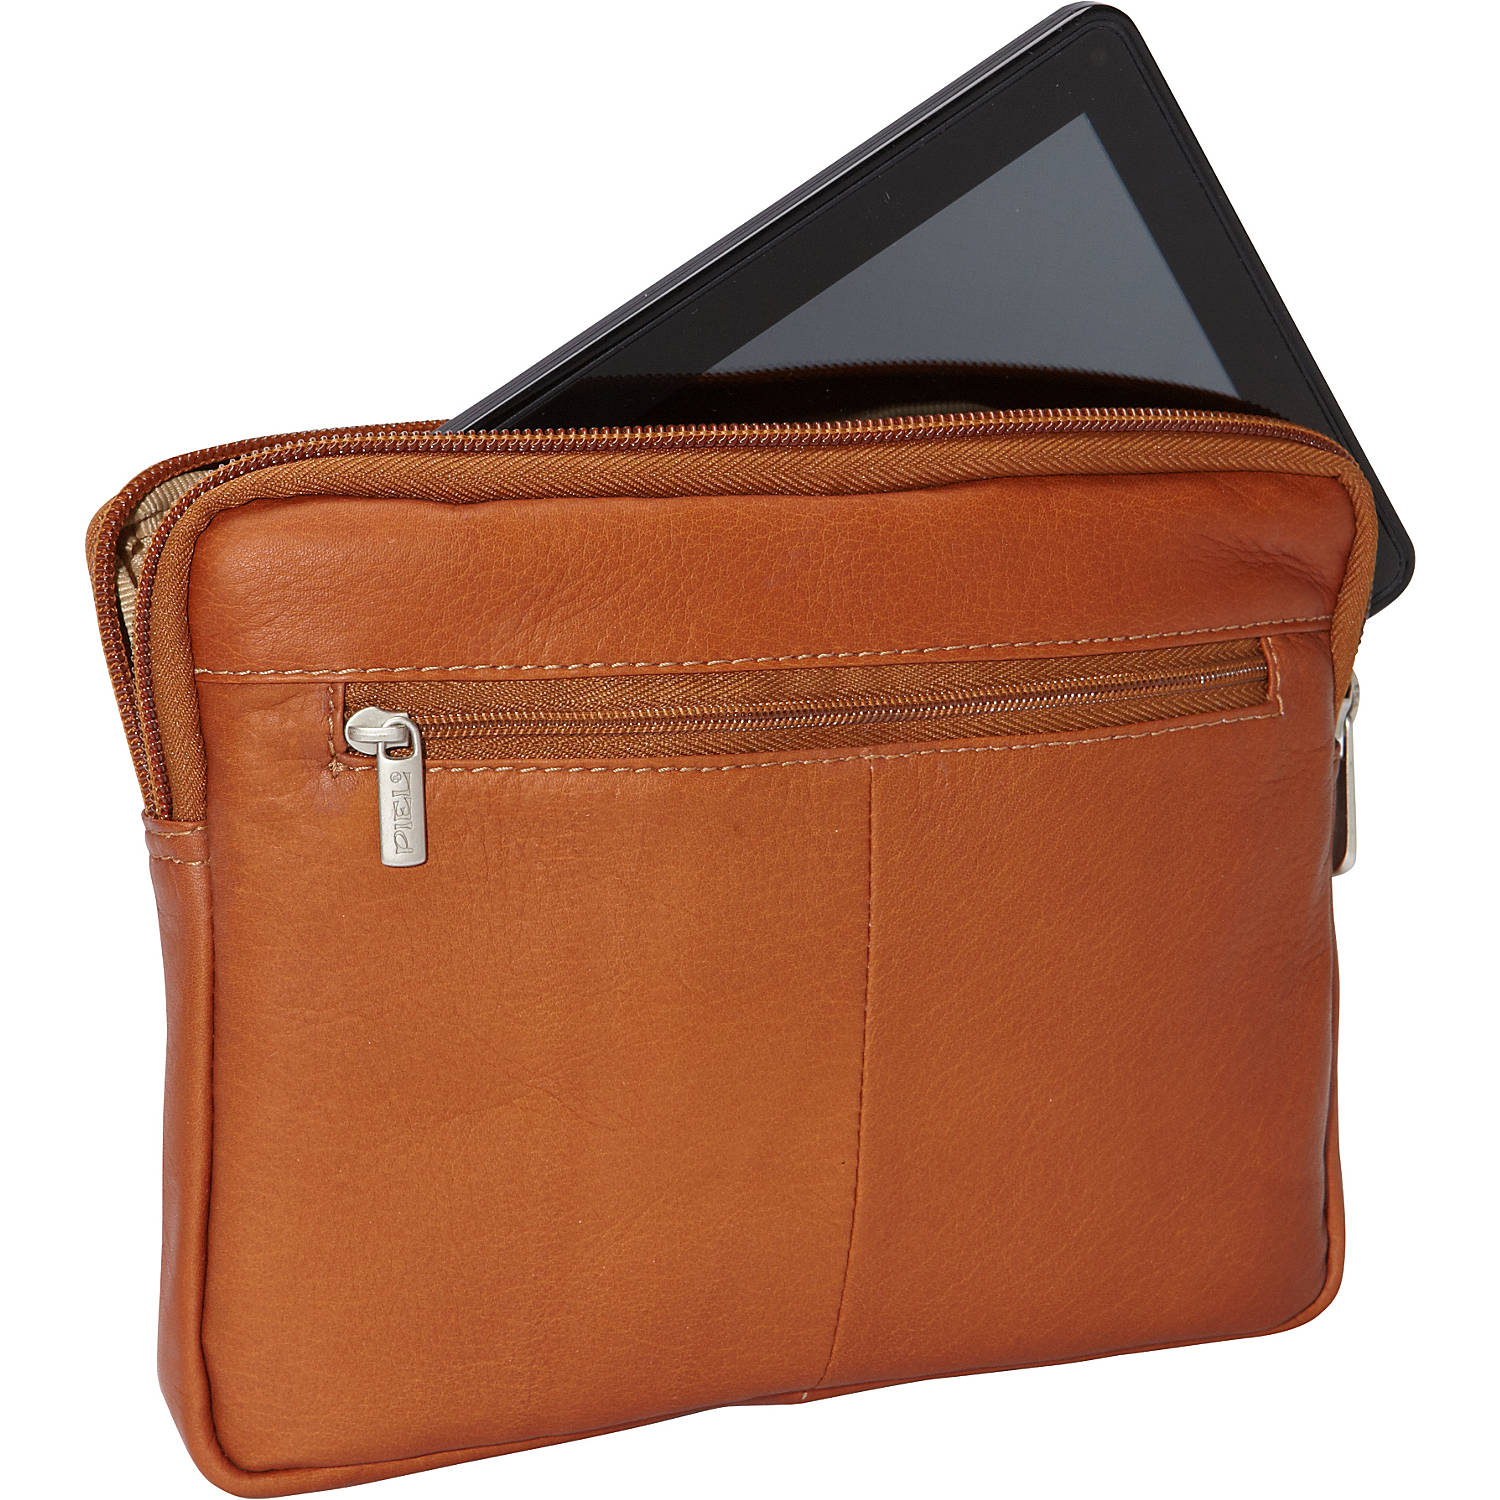 Saltholmen Leather IPad Cover – P.A.P Sweden – cover what you care for